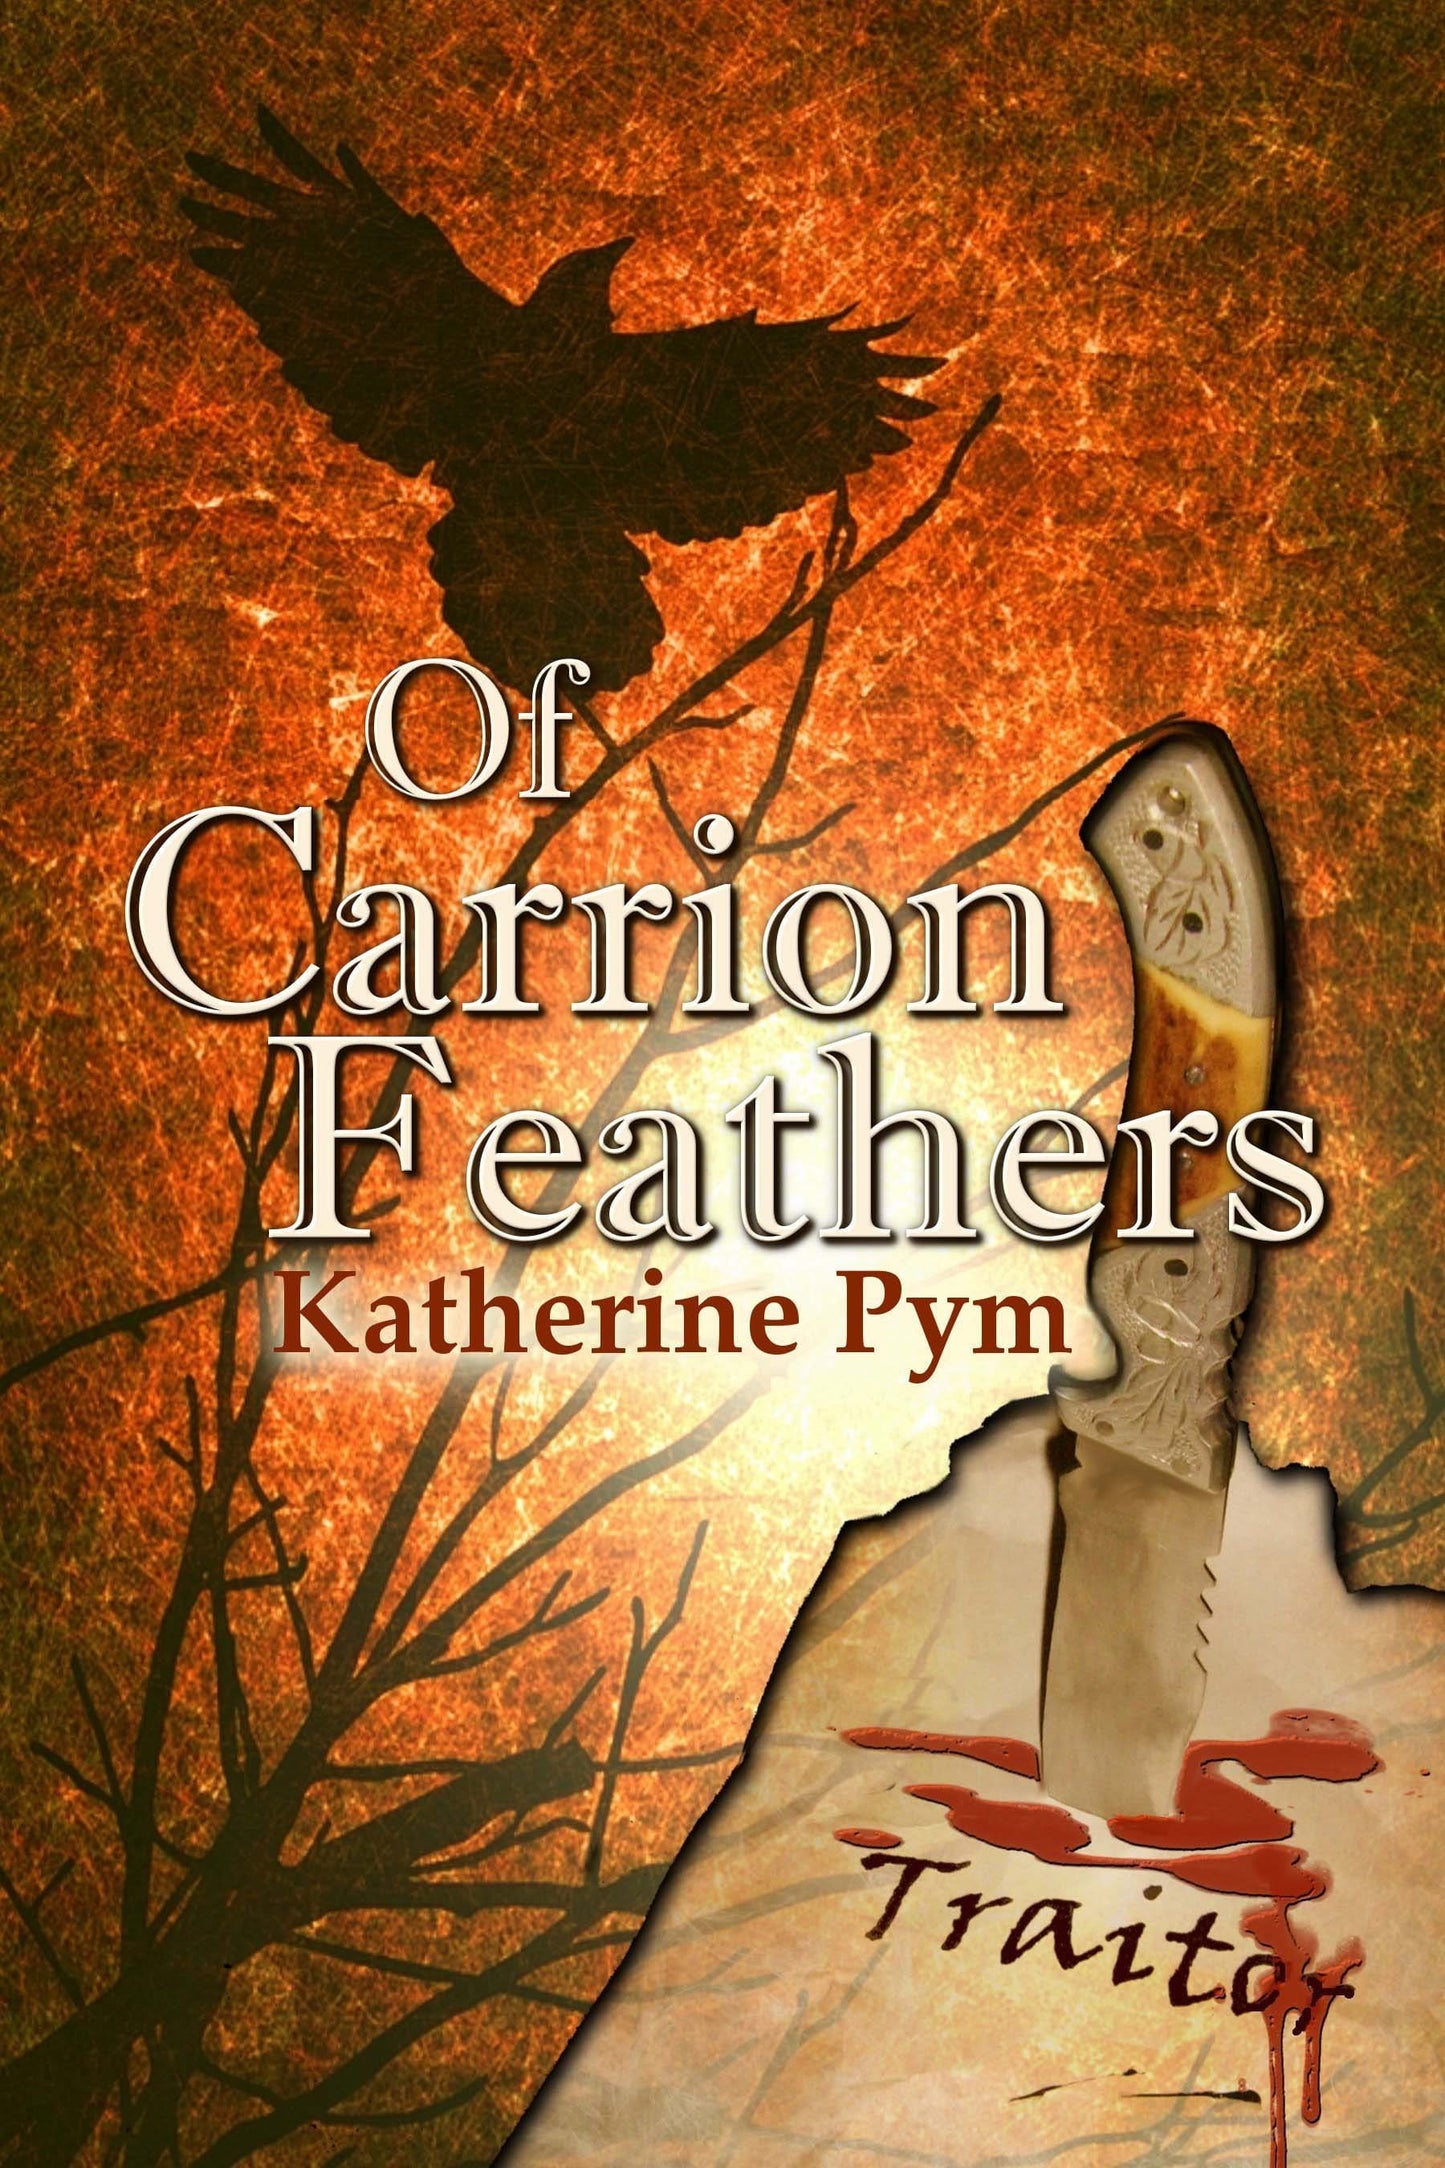 Of Carrion Feathers